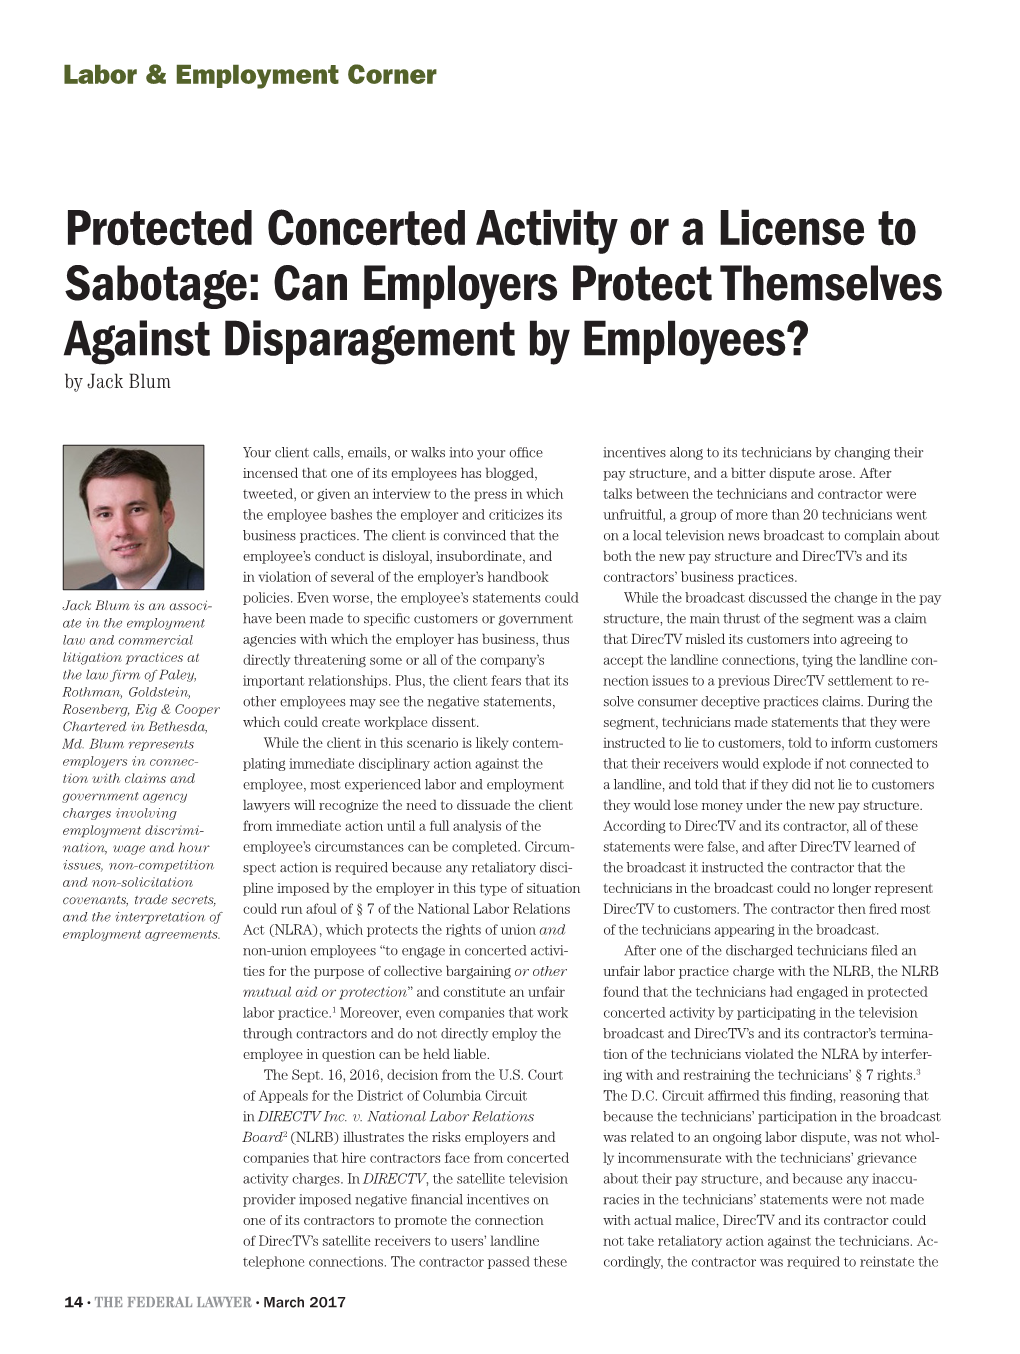 Protected Concerted Activity Or a License to Sabotage: Can Employers Protect Themselves Against Disparagement by Employees? by Jack Blum